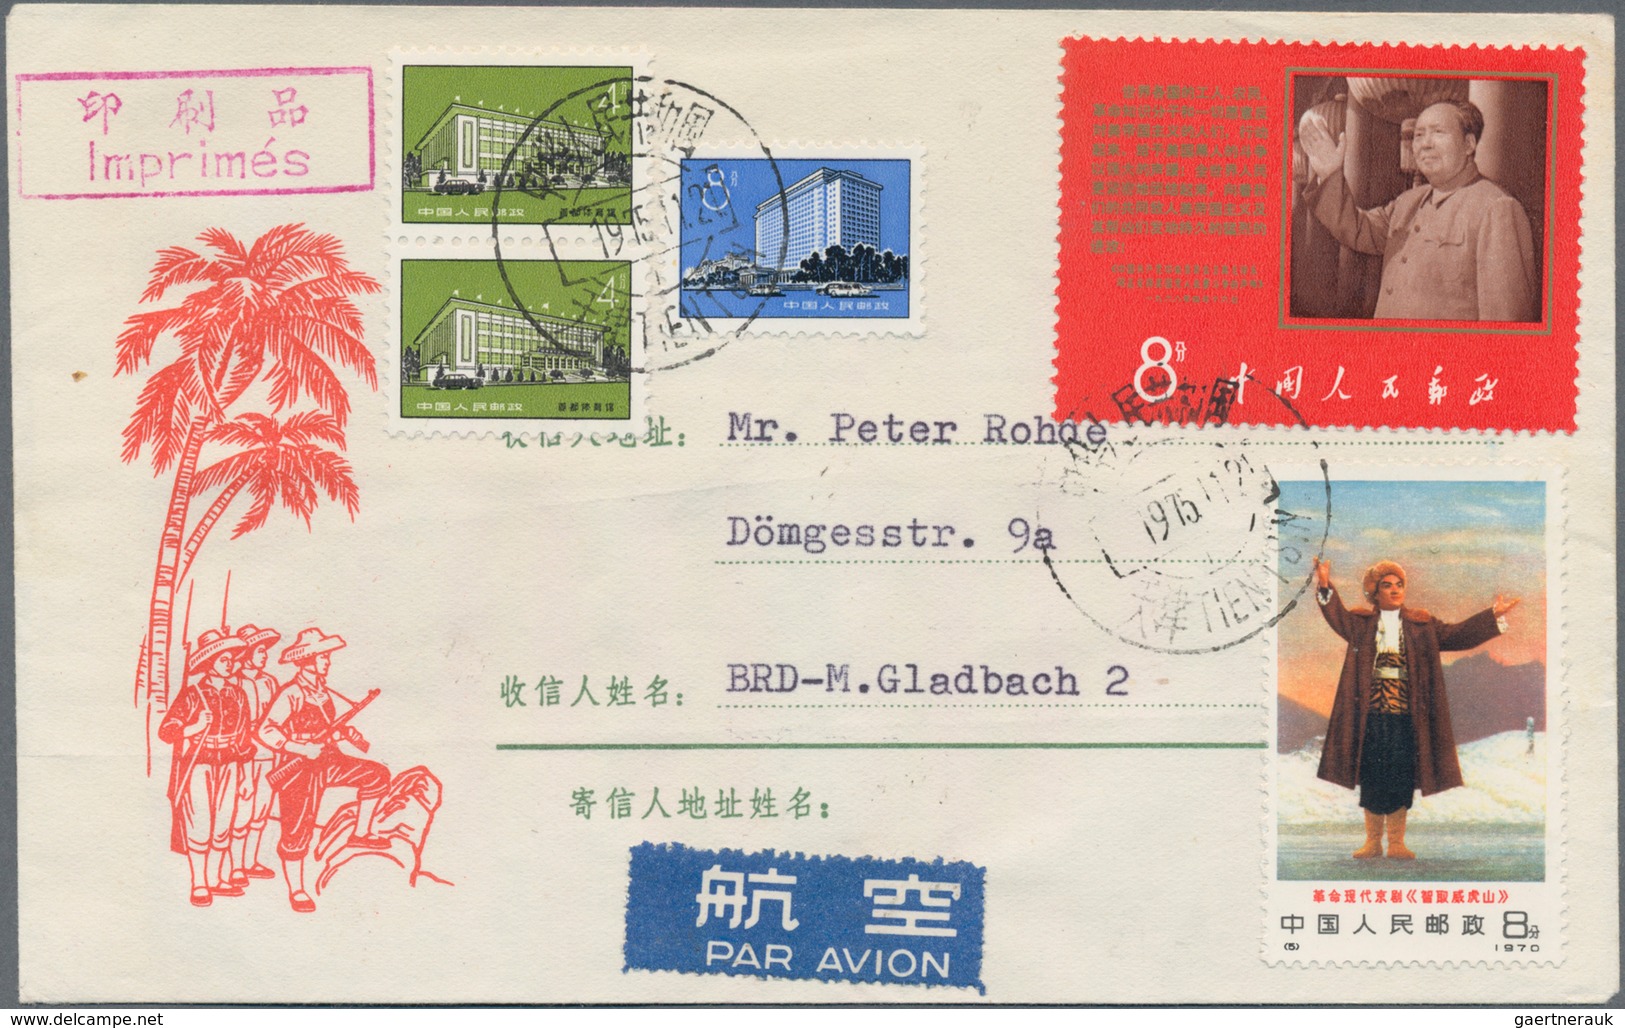 China - Volksrepublik: 1968/70, Air Mail Printed Matter Cover Addressed To Germany, Bearing Mao's An - Briefe U. Dokumente